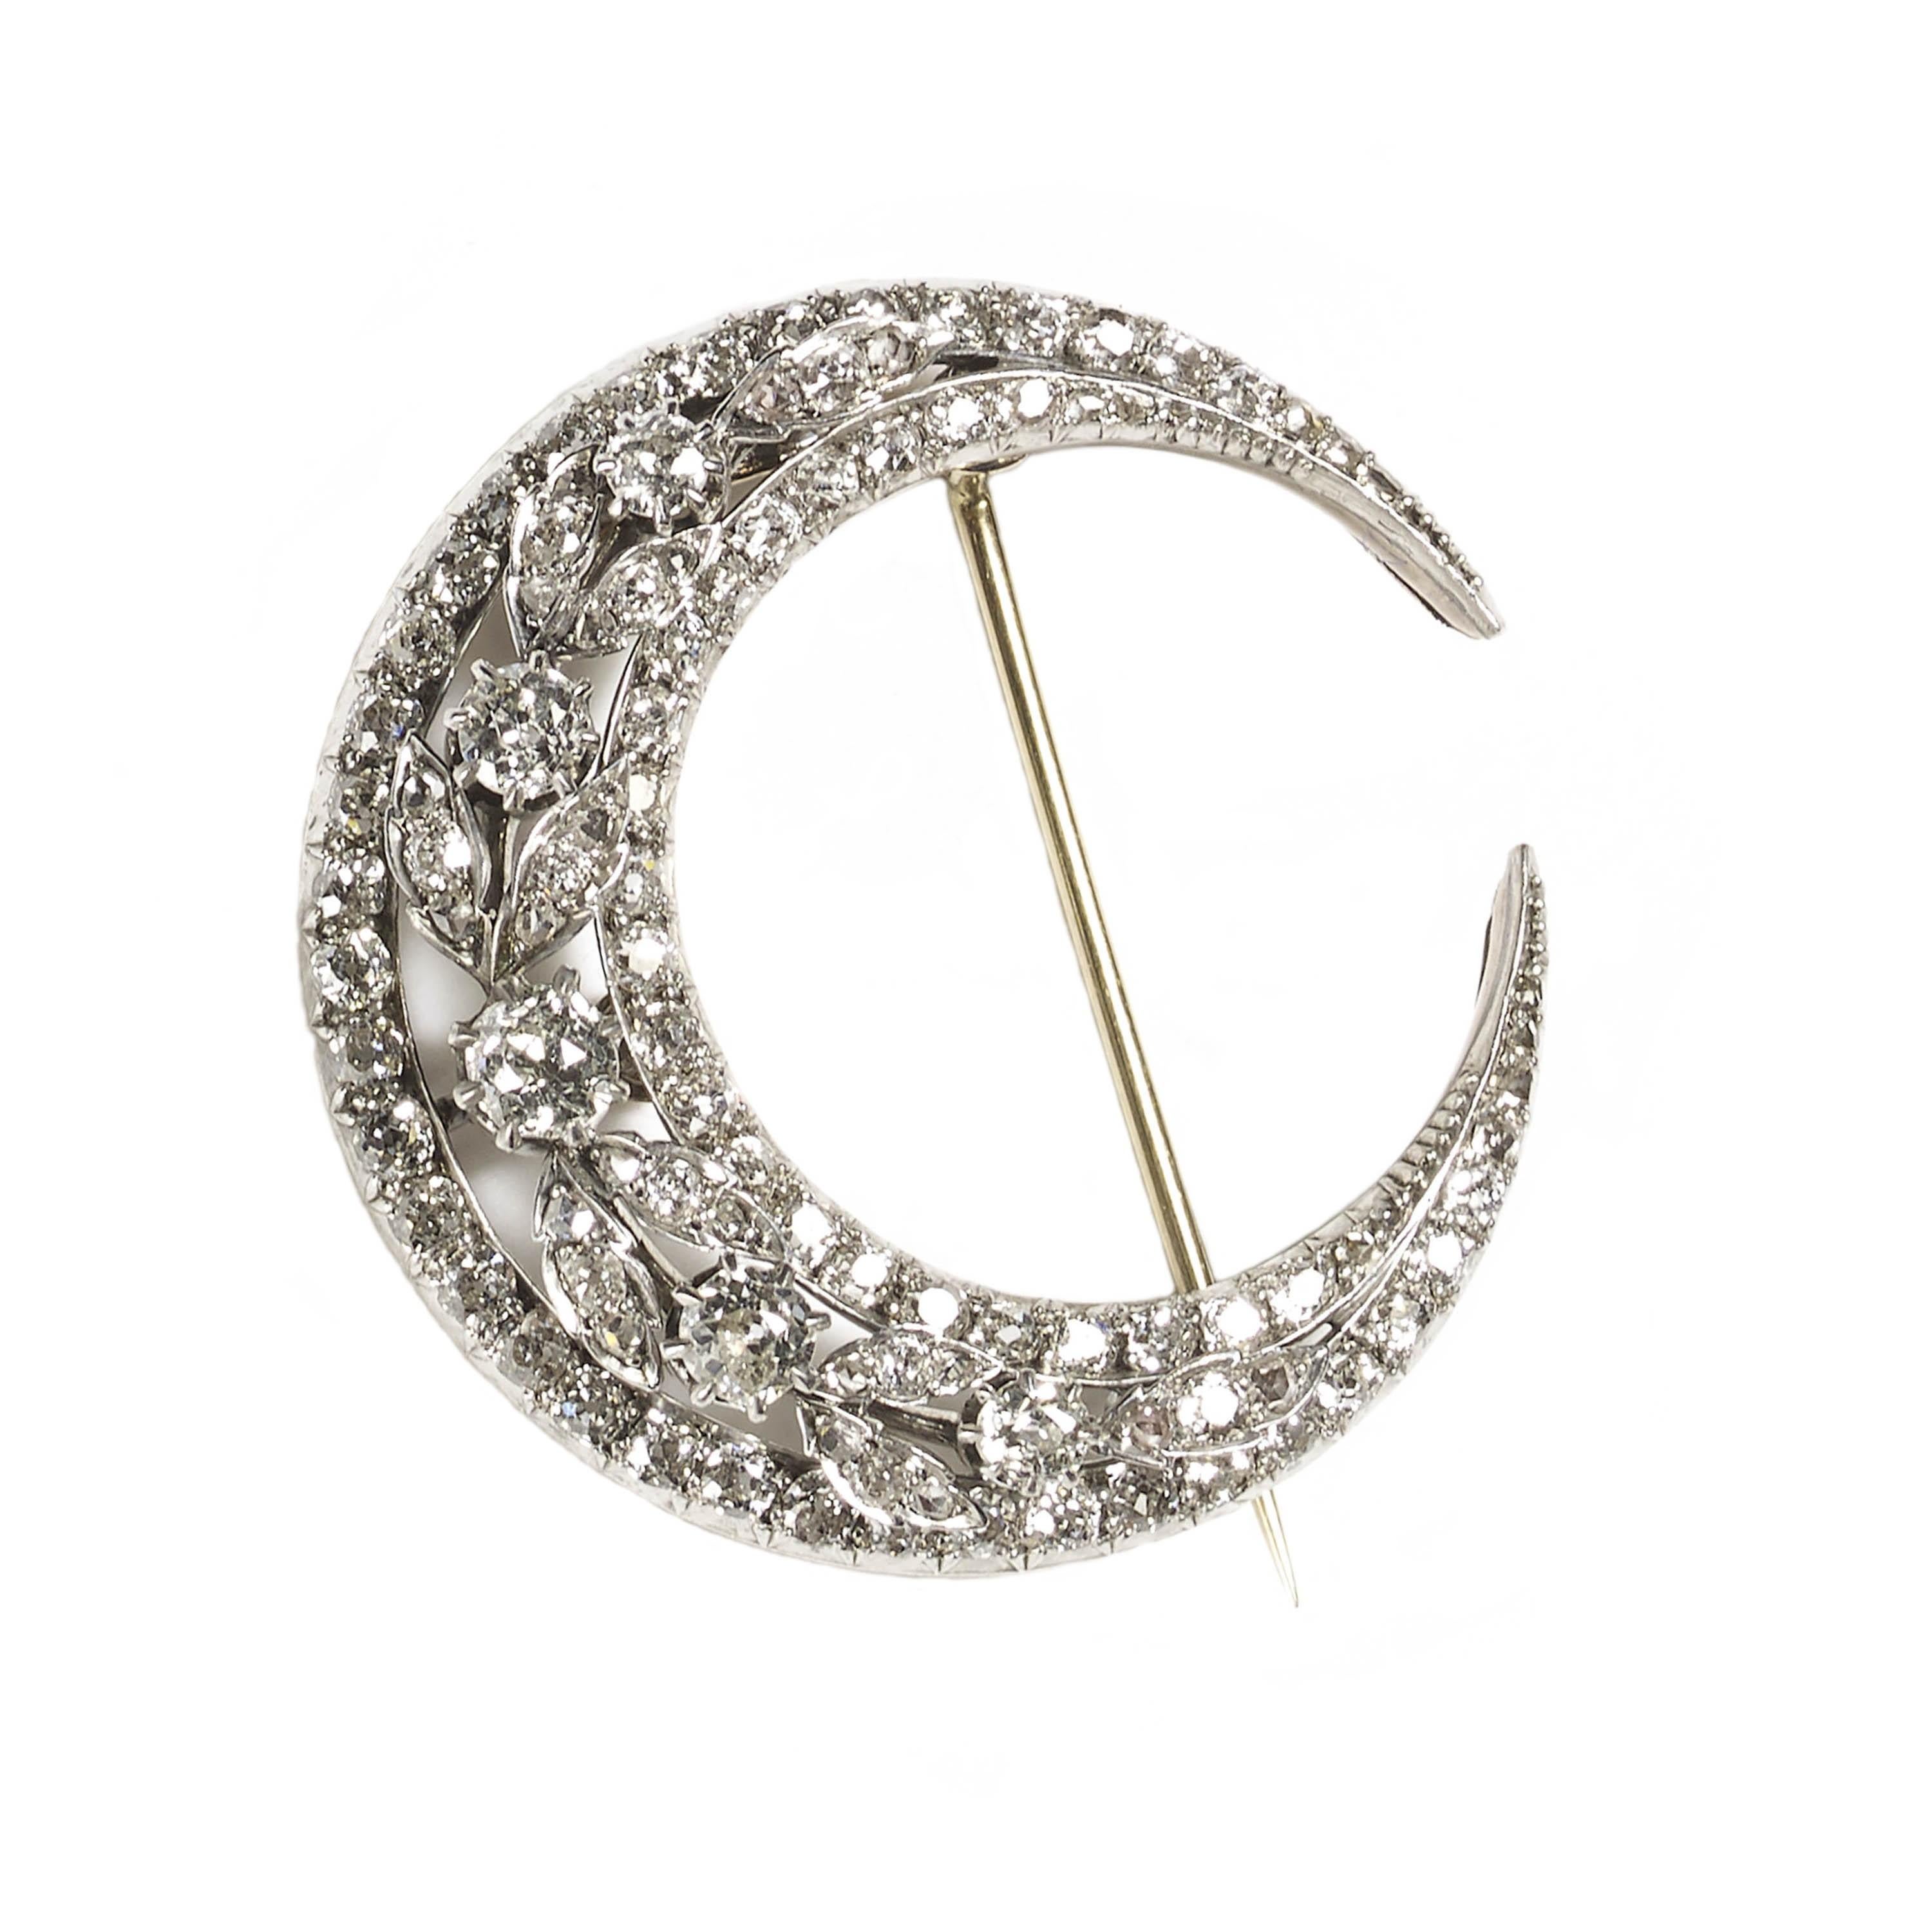 An antique diamond crescent brooch, set with old-cut diamonds, weighing an estimated total of 4.50ct, in a three row design, with an inner row and outer row, set with graduating old-cut diamonds, tapering to rose-cut diamonds, with a centre wreath